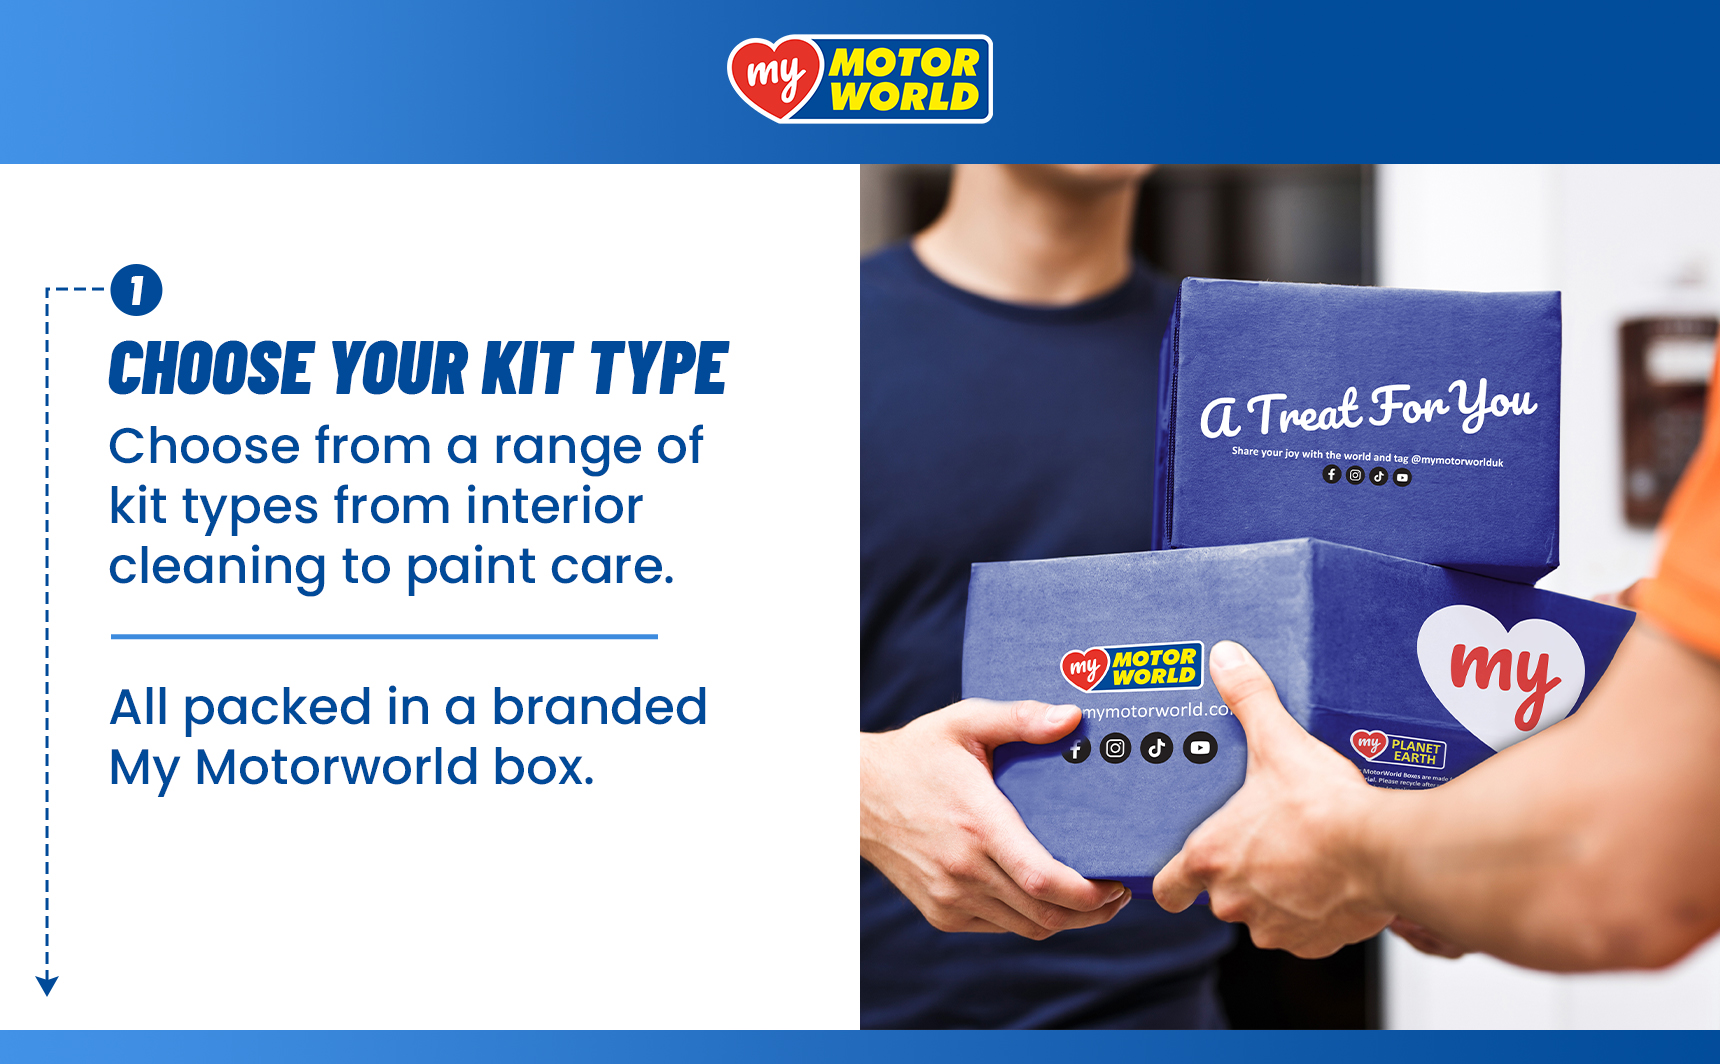 Step 1 - Choose your kit type - image of blue my motorworld branded boxes